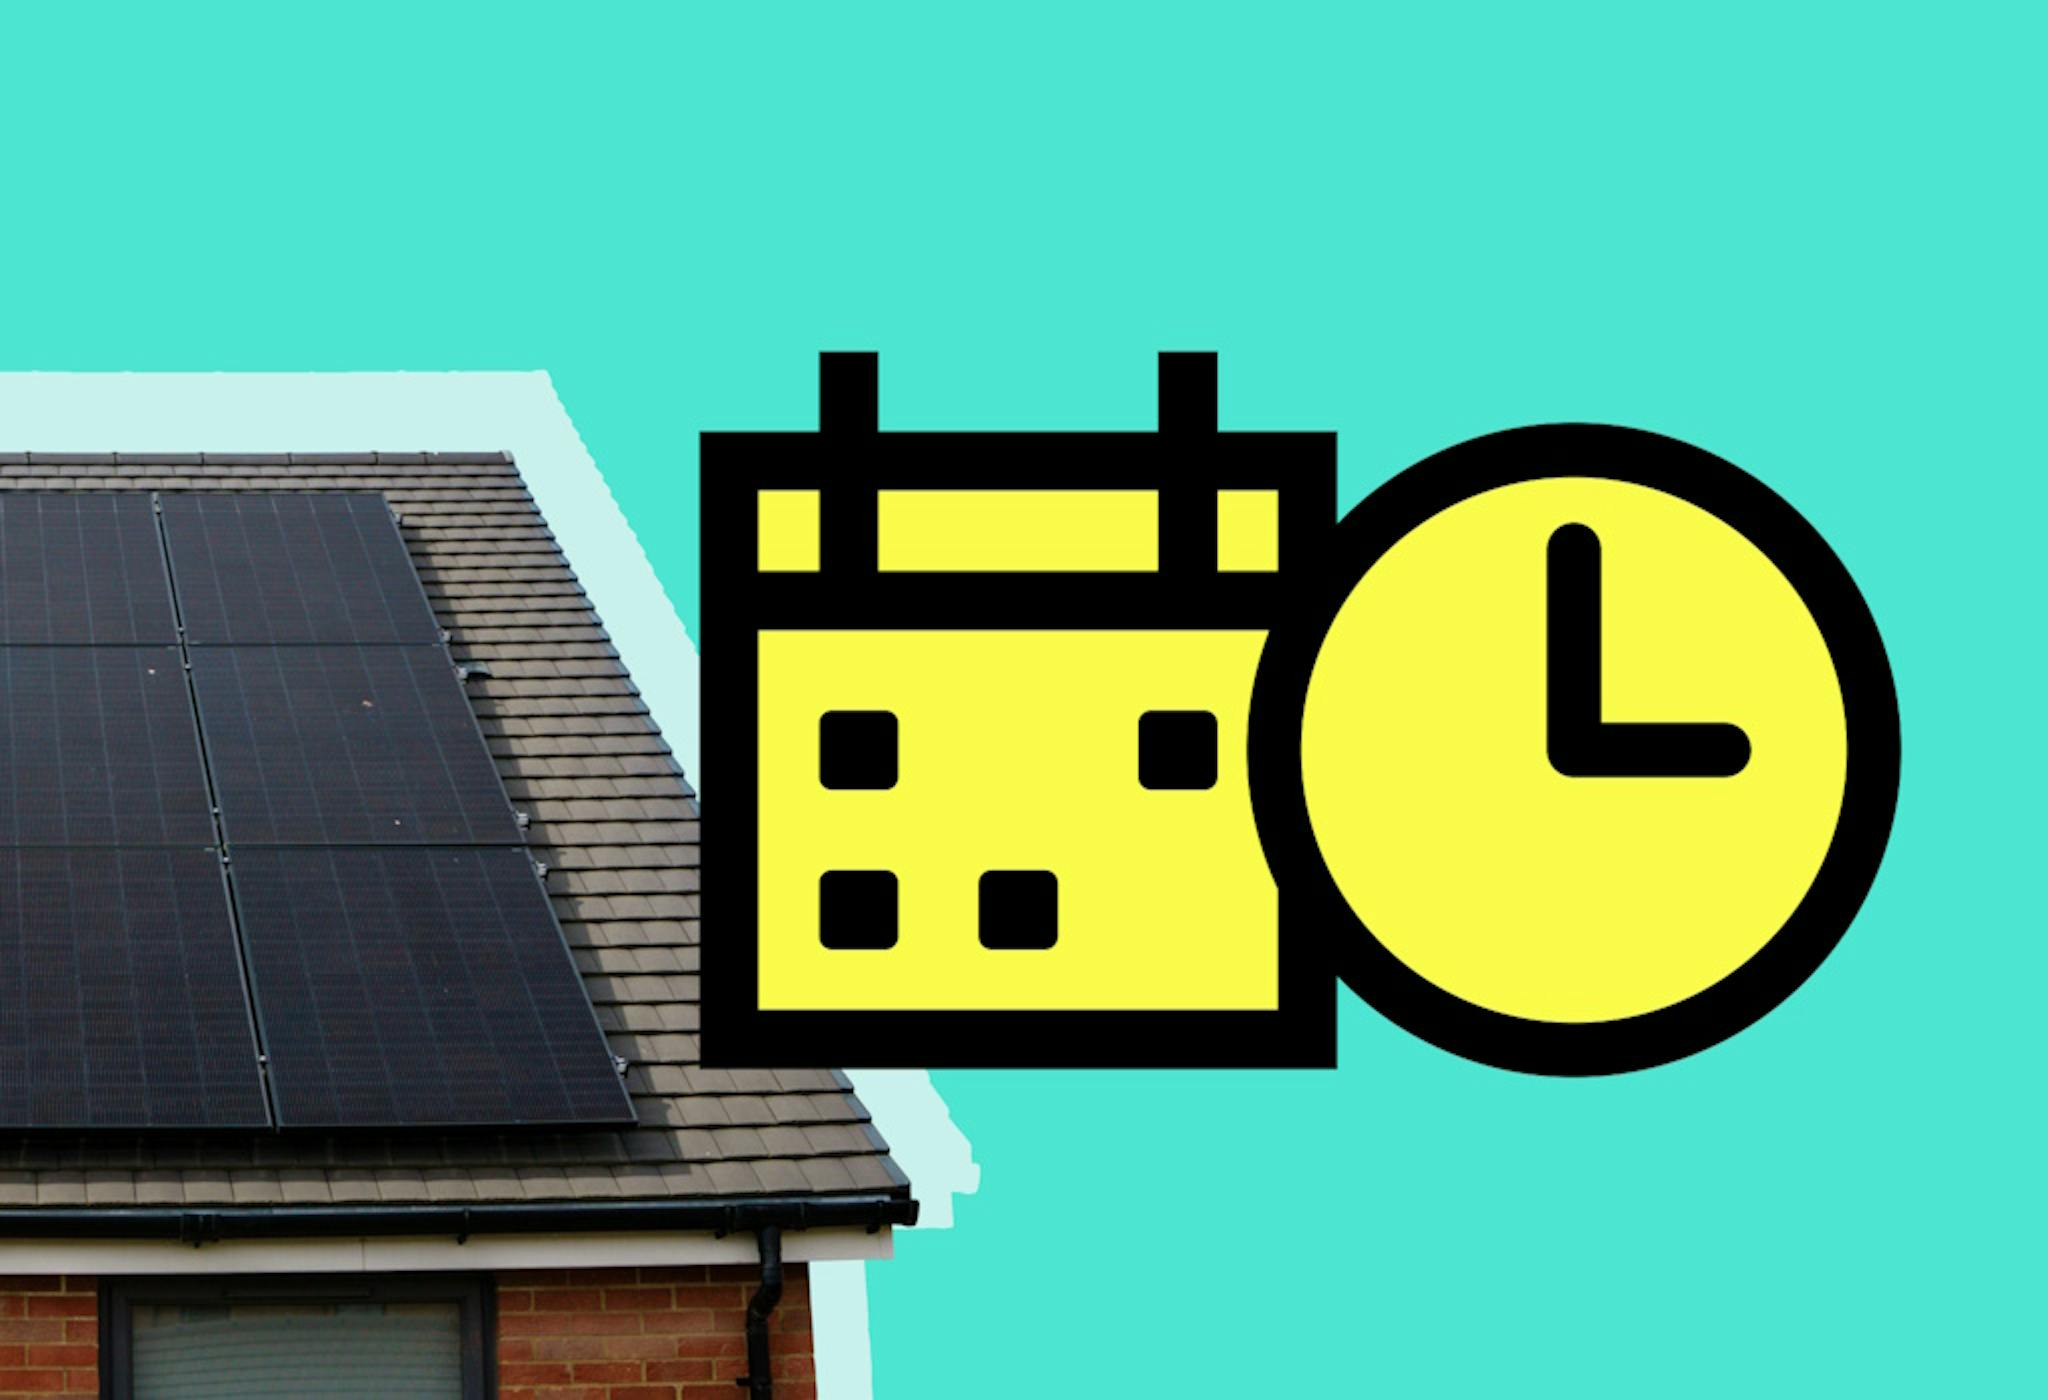 Yellow and black graphics of a calendar and clock against an aquamarine background and a house with black solar panels on the roof